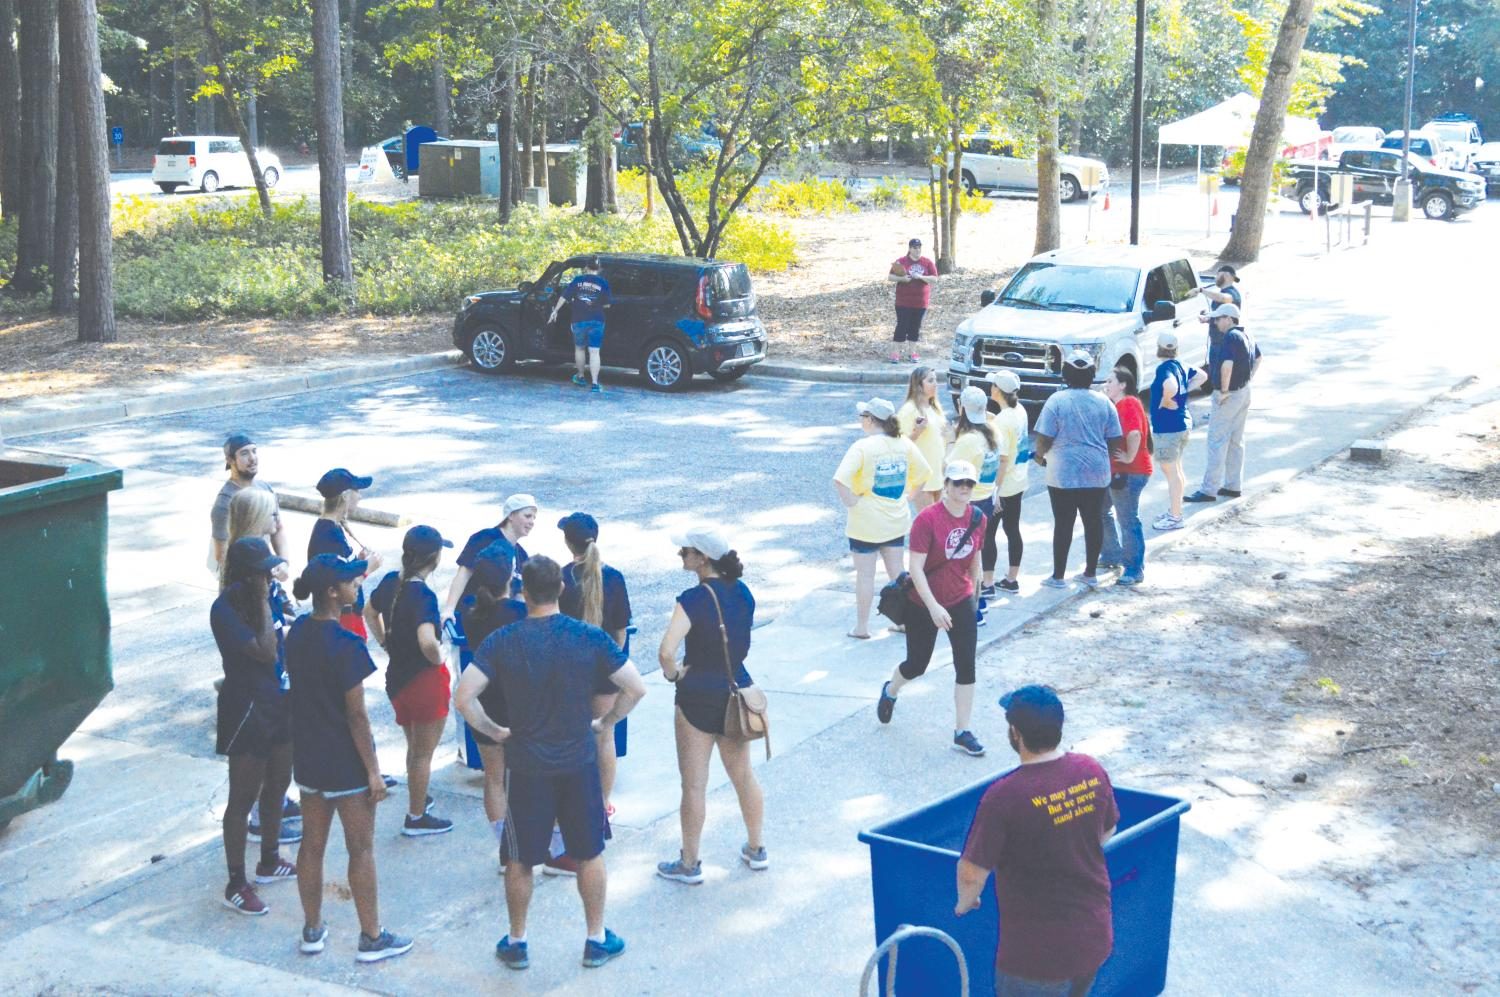 FMU faculty, staff and students help move in 575 new students during the Aug. 19 move-in day.